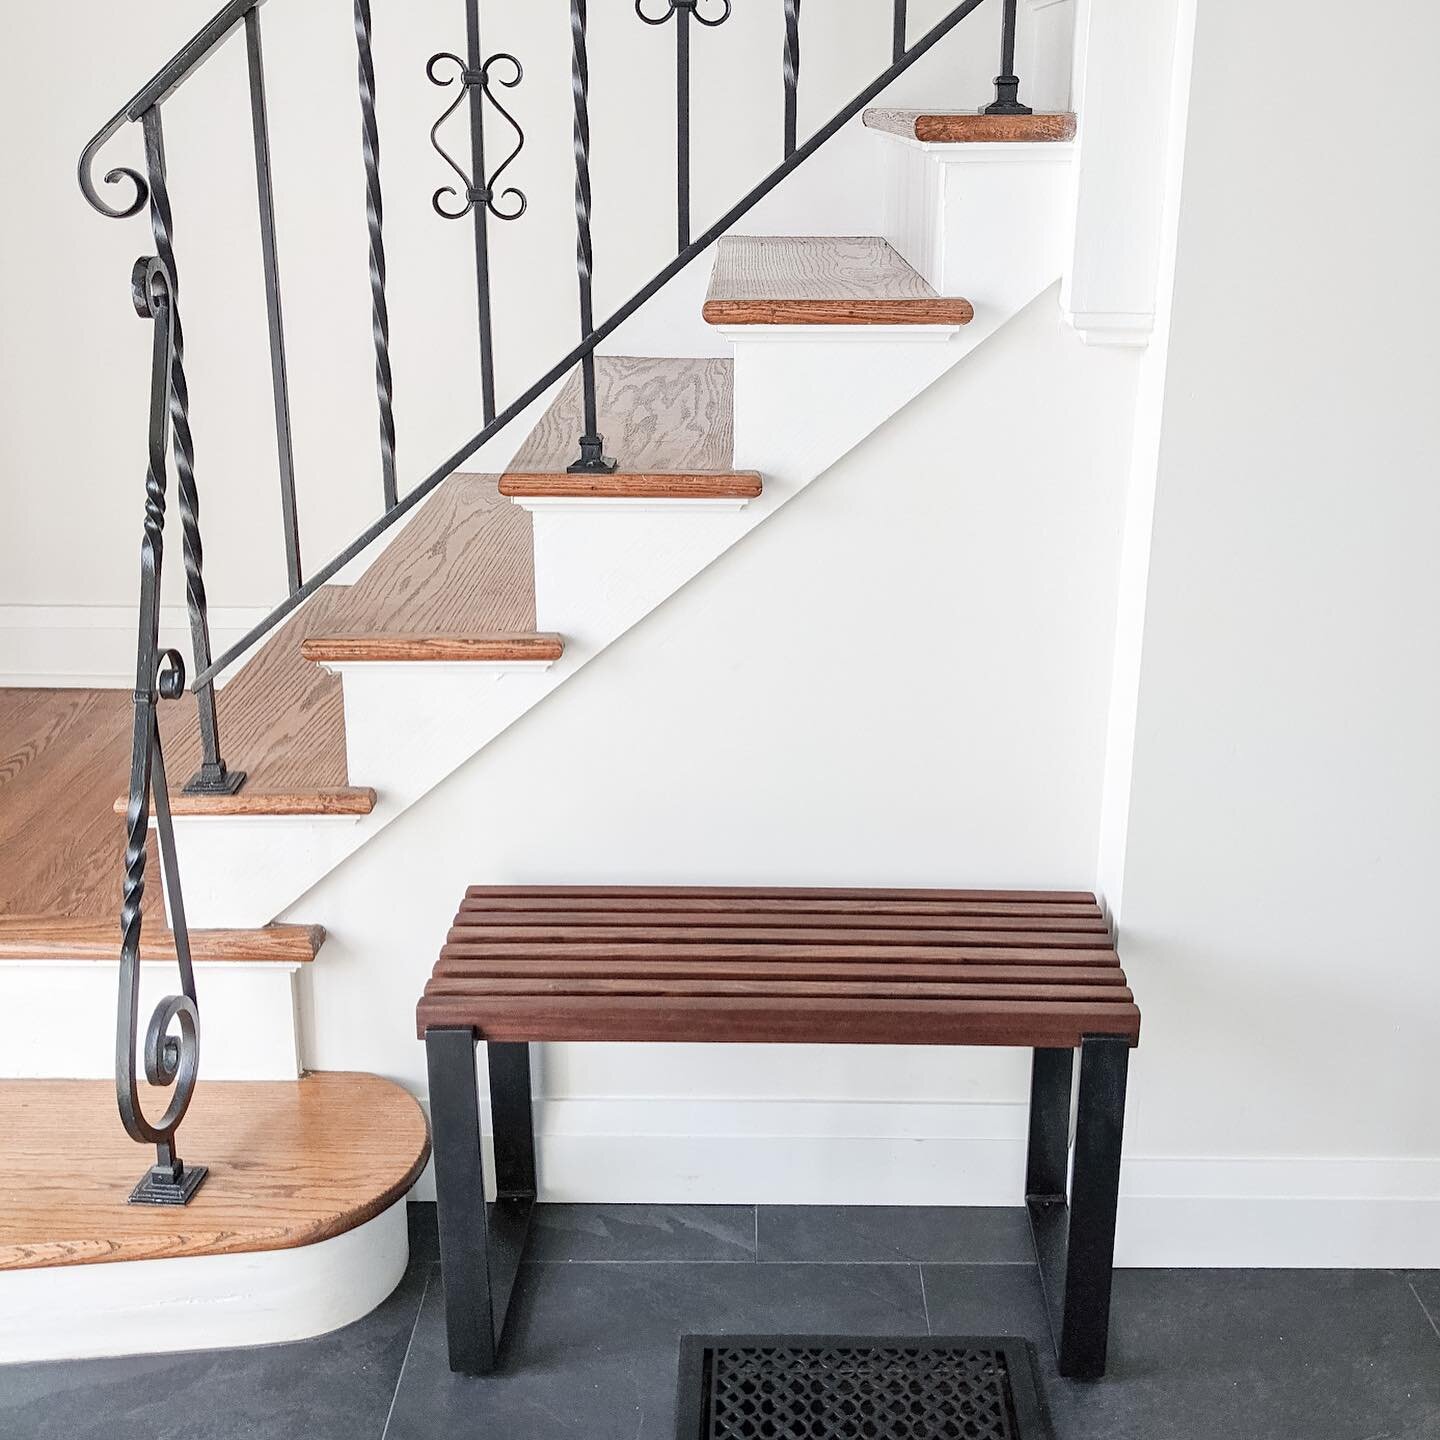 This slat top bench is made of black walnut and a matte black steel base. It fits into this space perfectly... like a custom piece should!

#customfurniture #customfurnituredesign #ontariowood #woodworking #interiordesign #interiordecor #woodbench #c